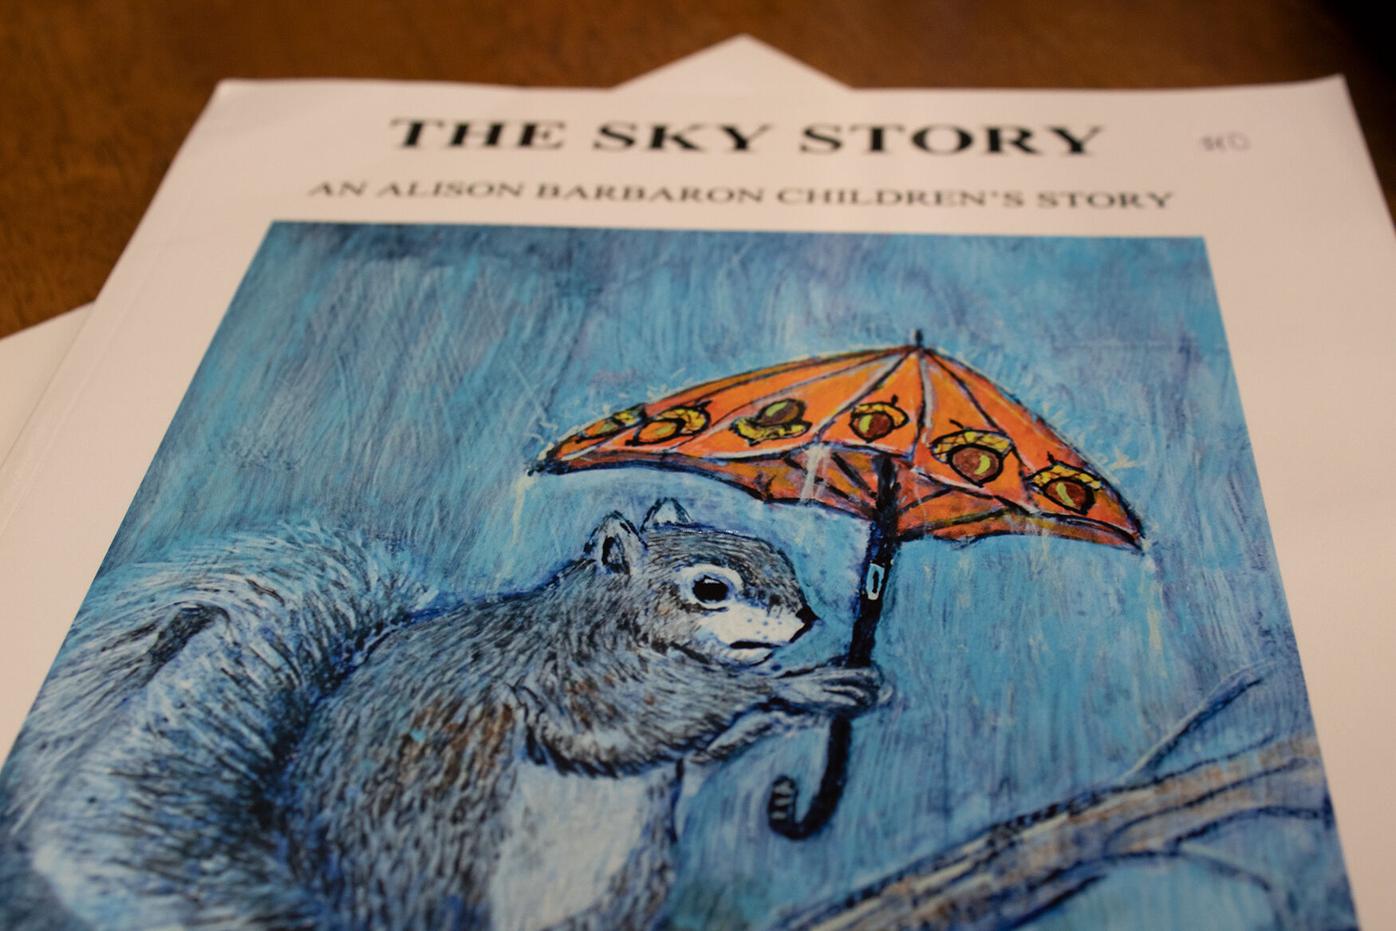 The Sky Story by Barbaron lies on a table ready to be purchased